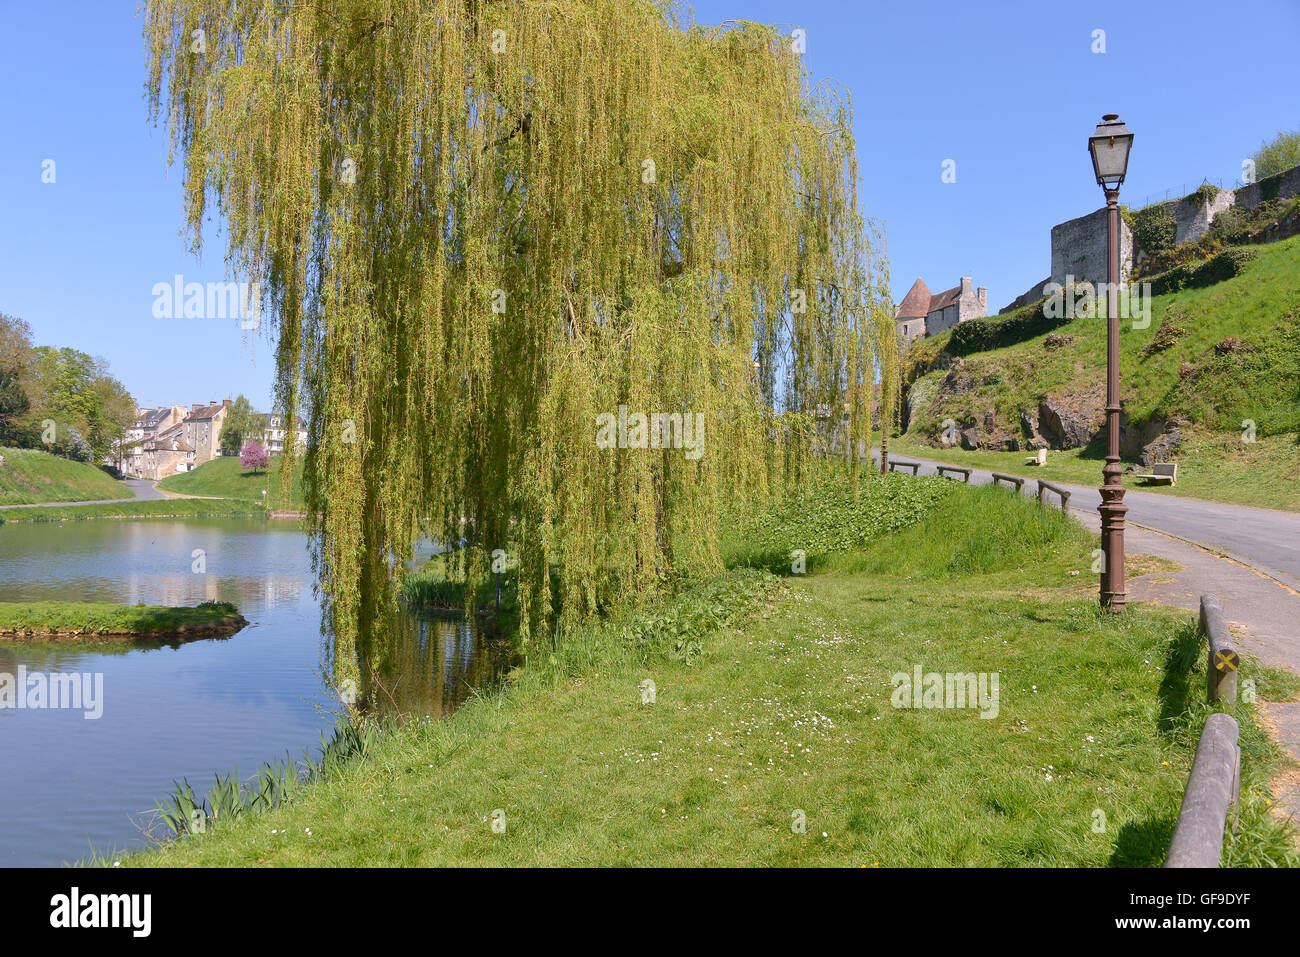 Pond and weeping willow at Falaise, a commune in the Calvados department in the Basse-Normandie region in northwestern France Stock Photo